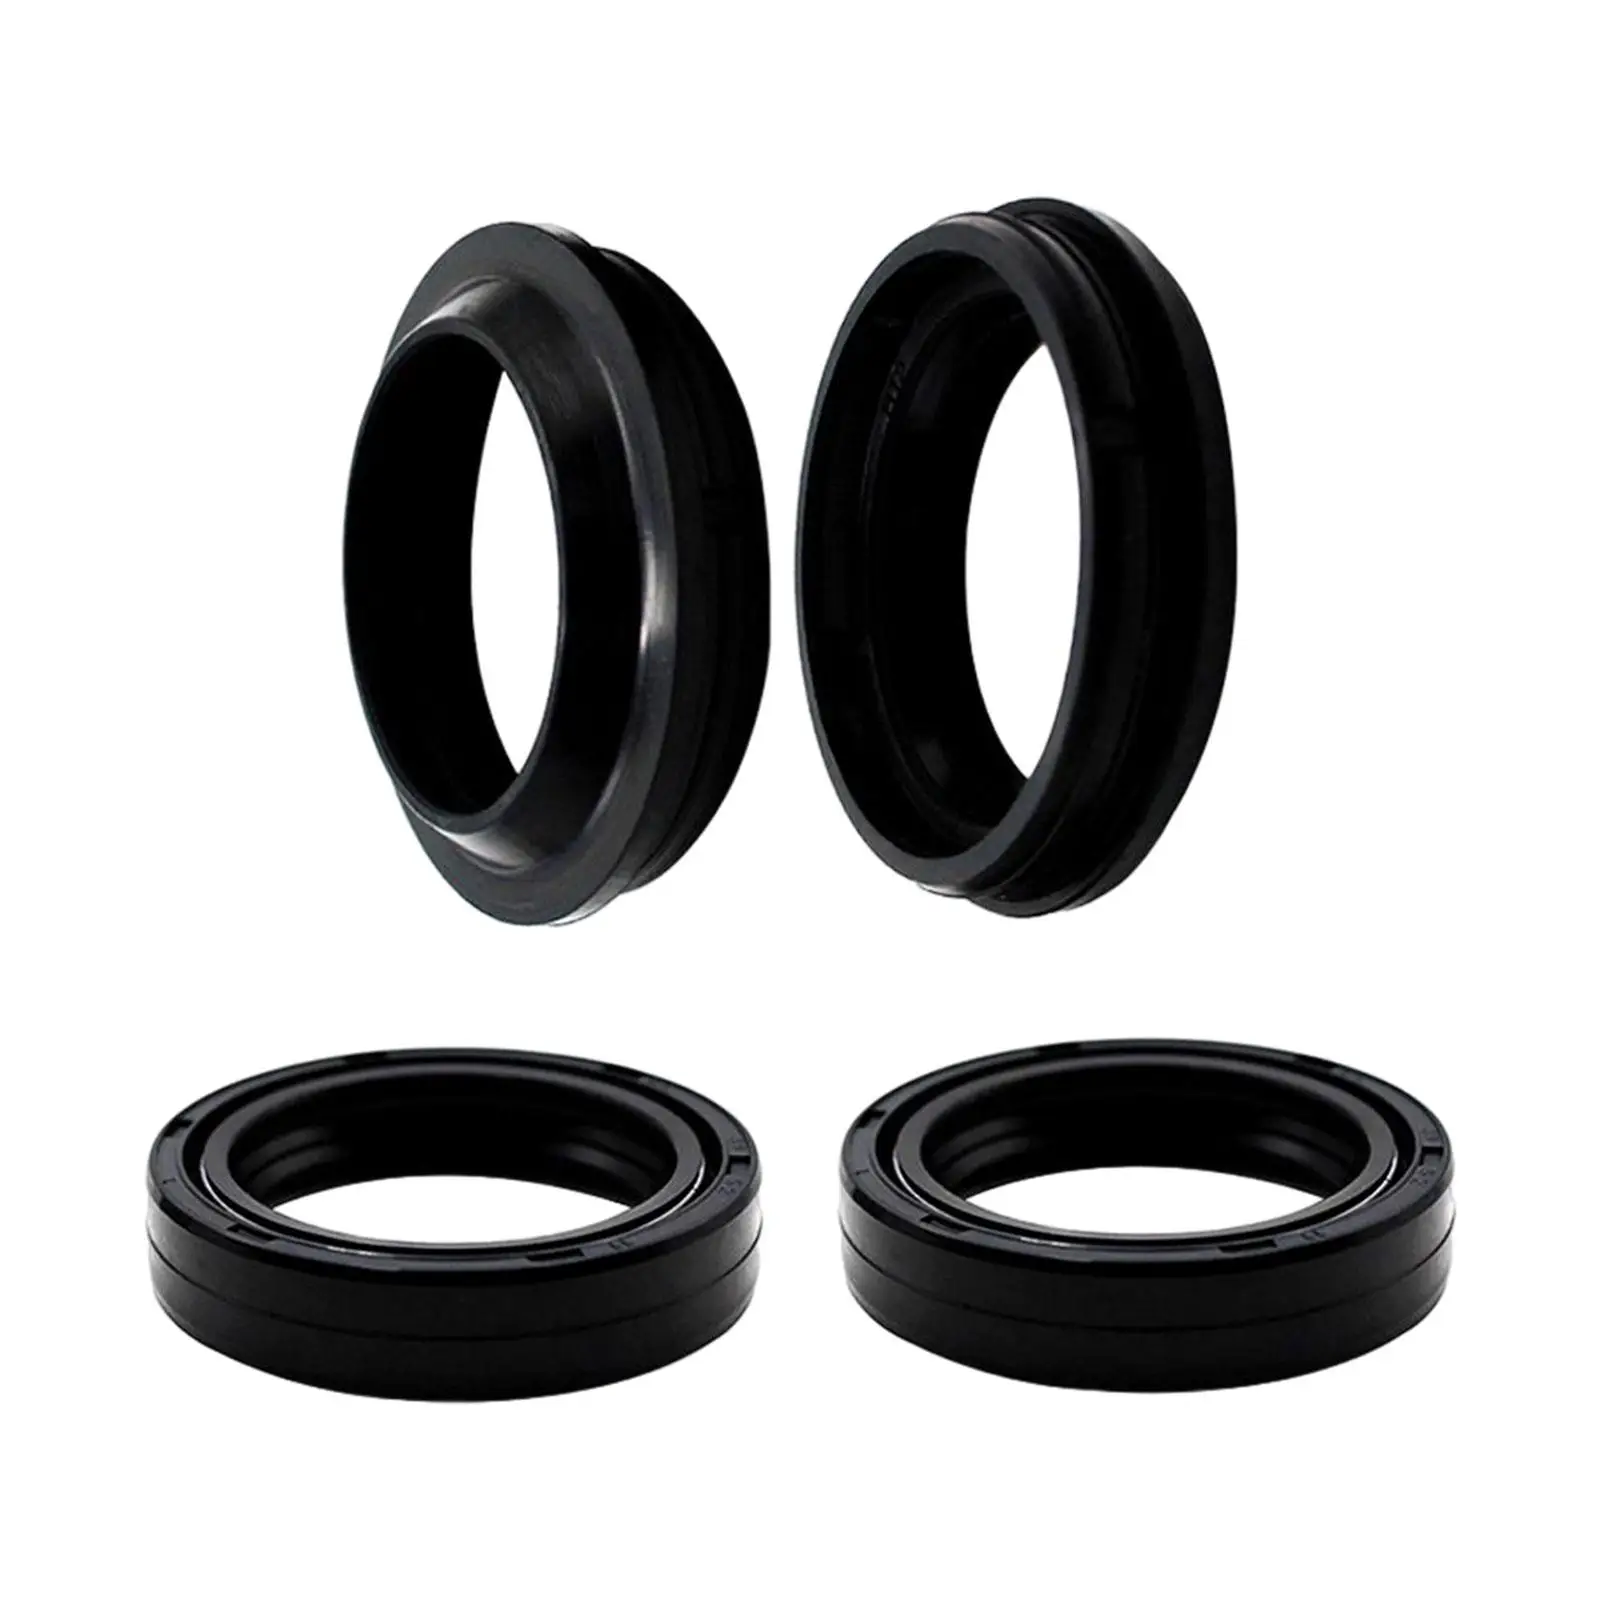 Front Fork Shock Oil Seal and Dust Seal Set Rubber for BMW G650GS G650x